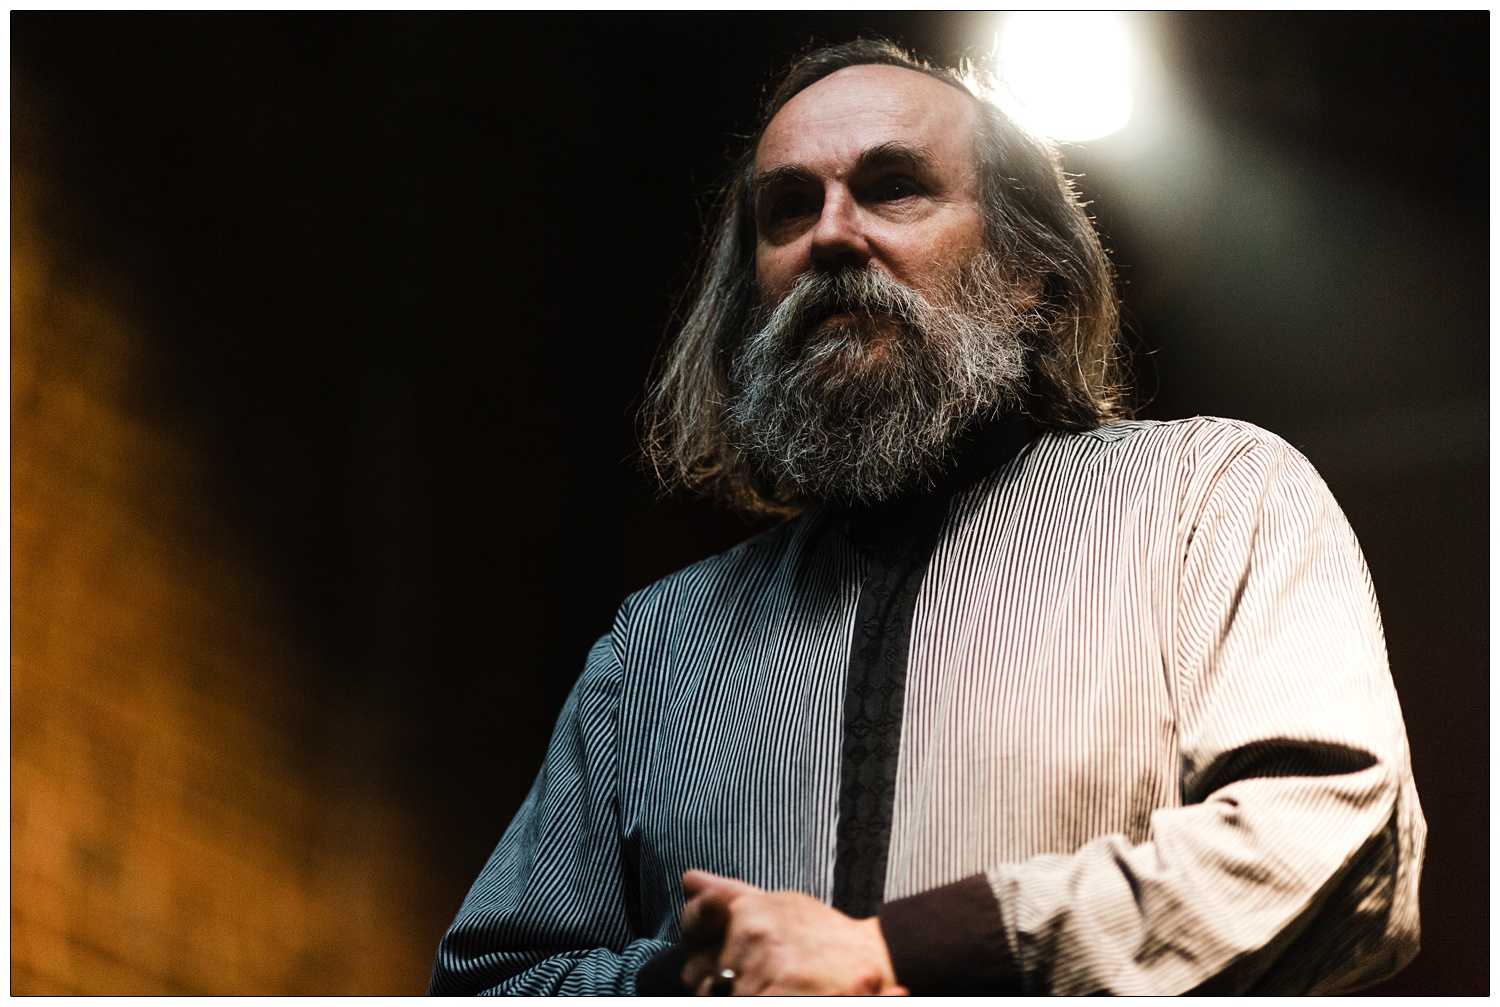 Lubomyr Melnyk on stage with light behind him in London.